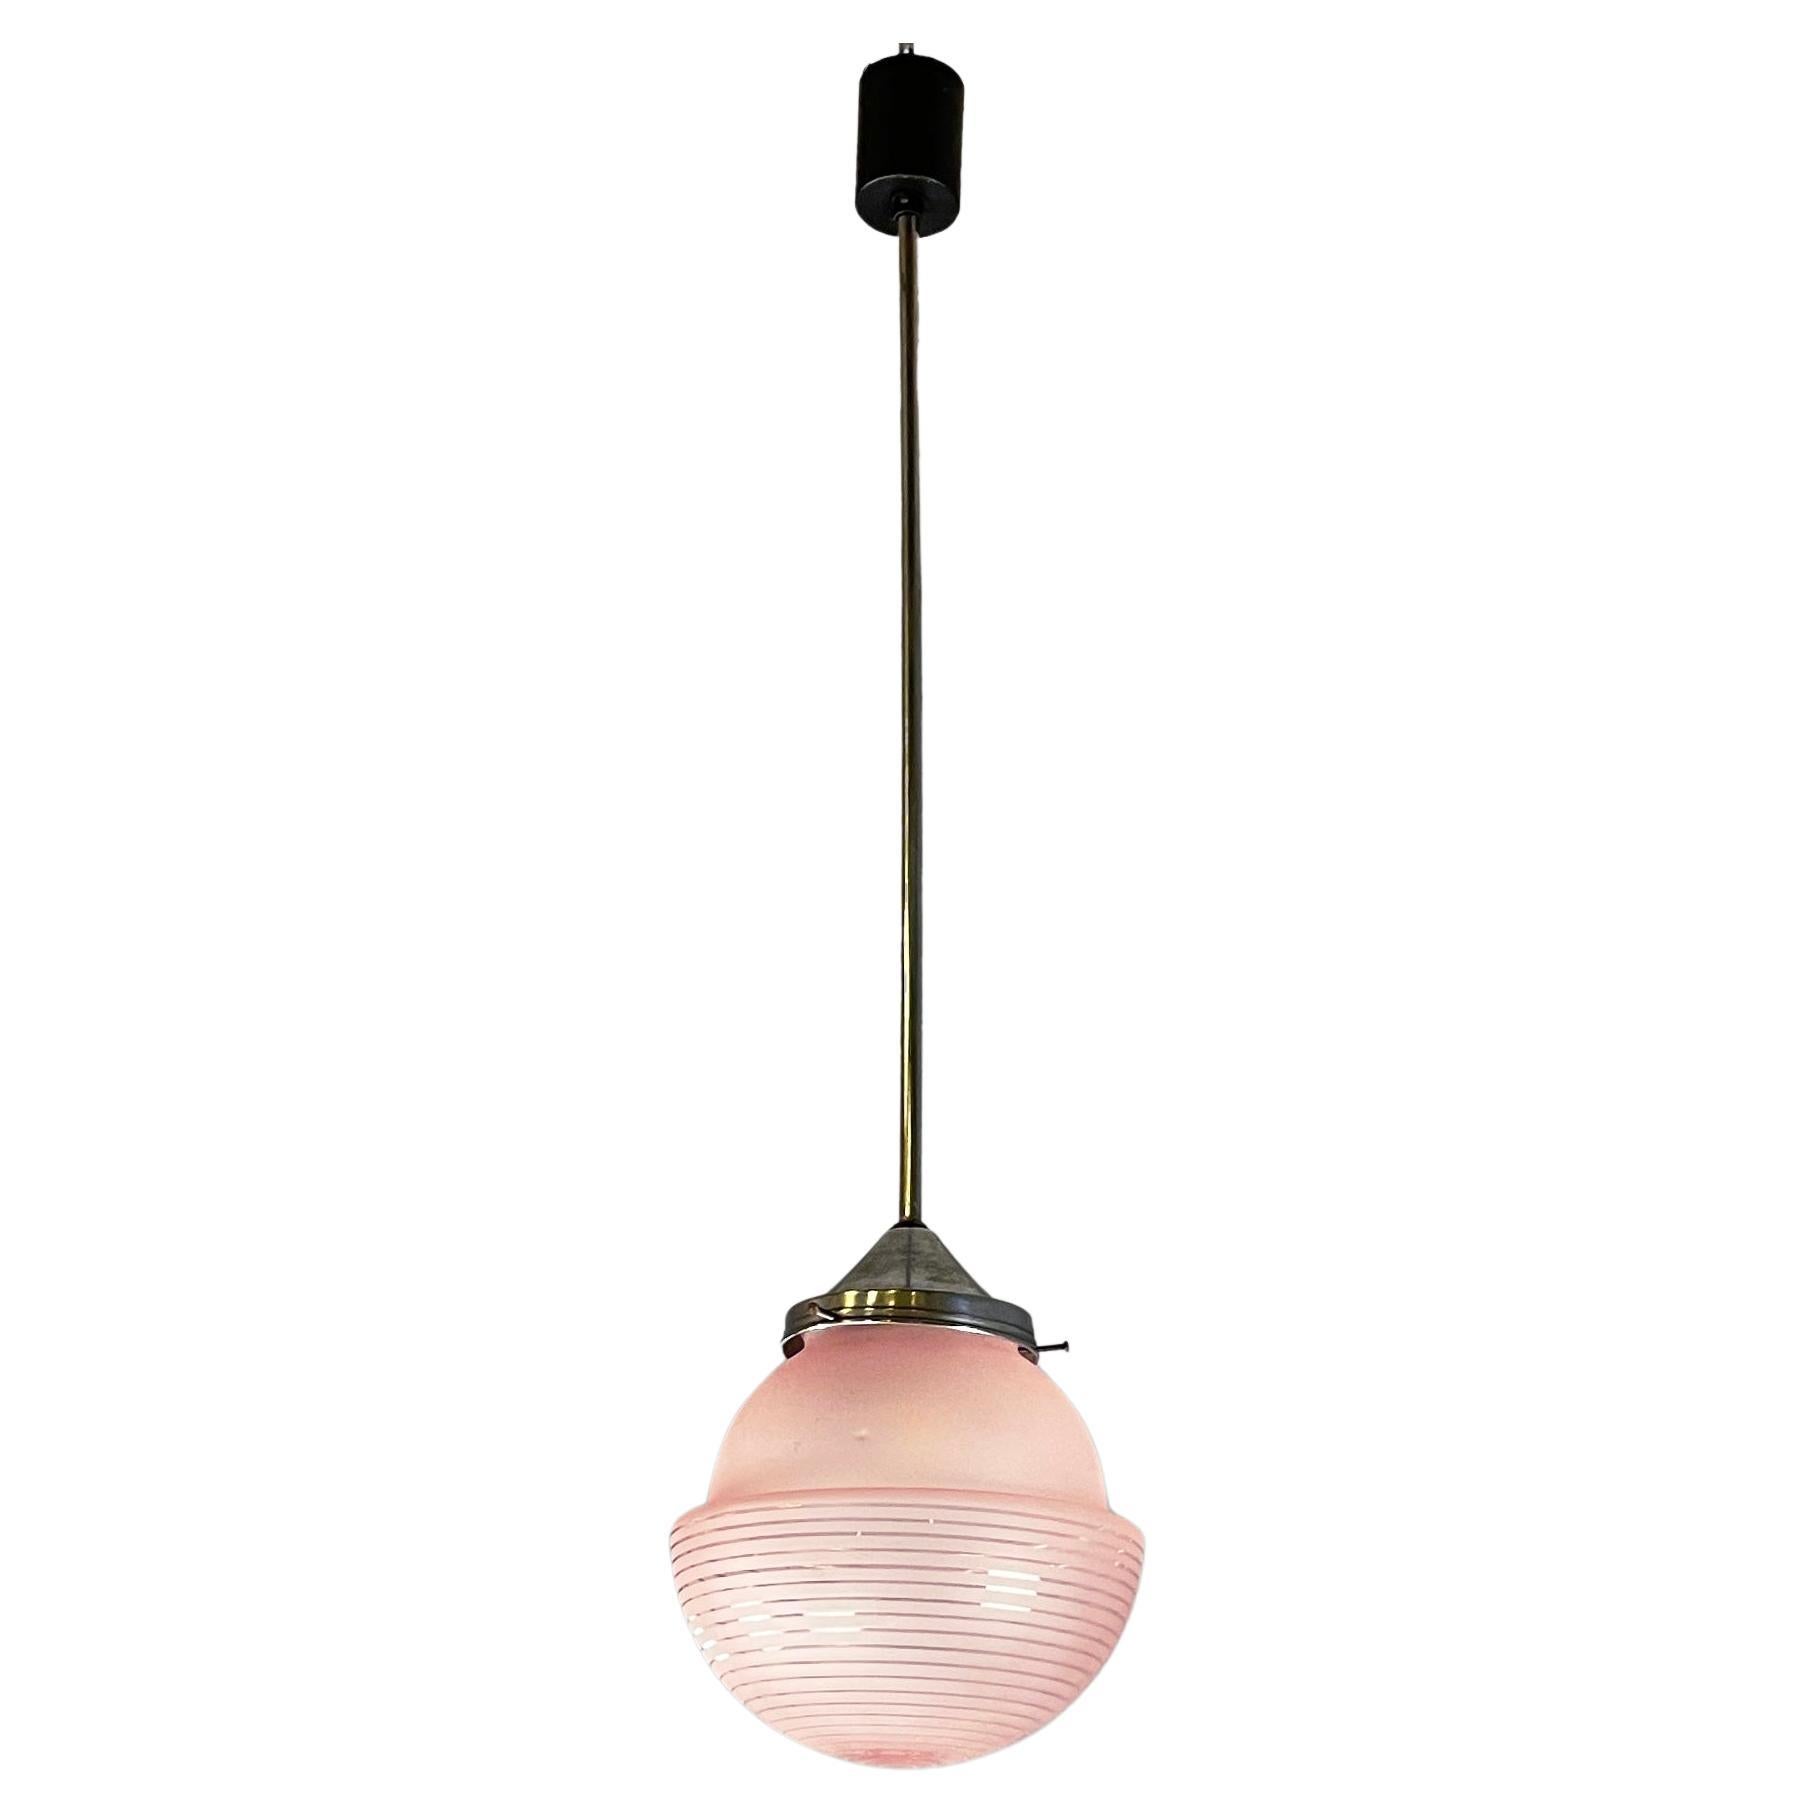 Italian mid-century modern Ceiling lamp in pink glass and metal, 1940s